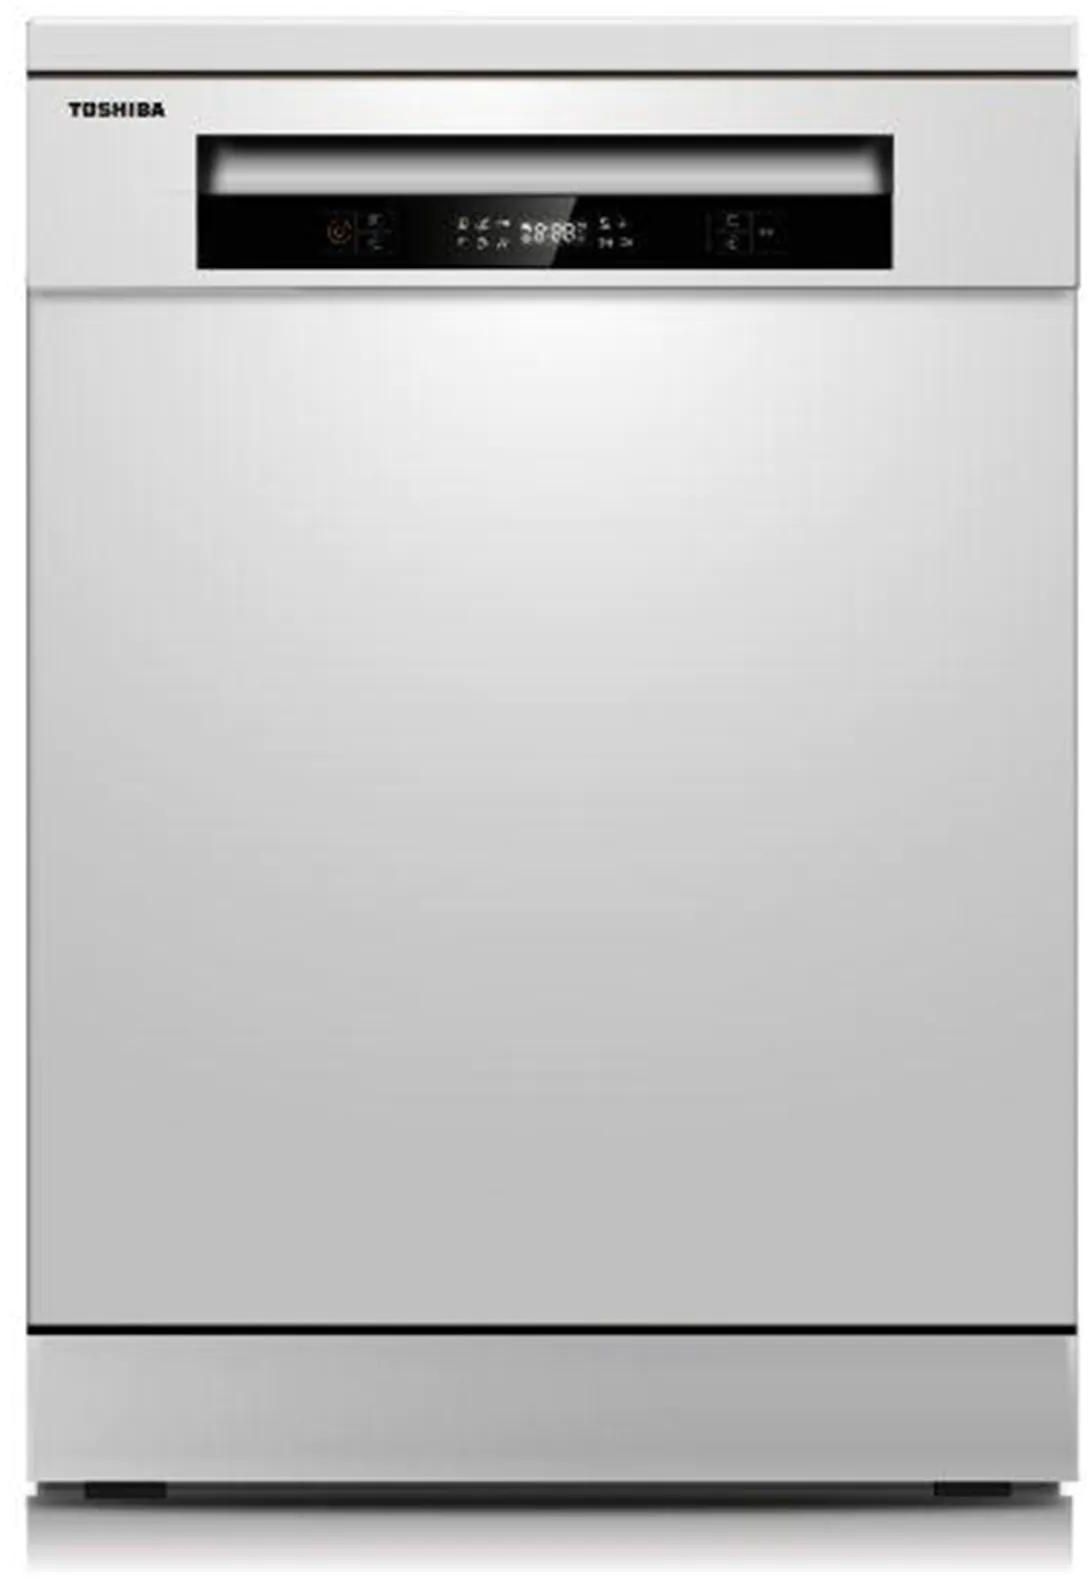 Toshiba dish washer, 13 place stting, dw-f14f1me 